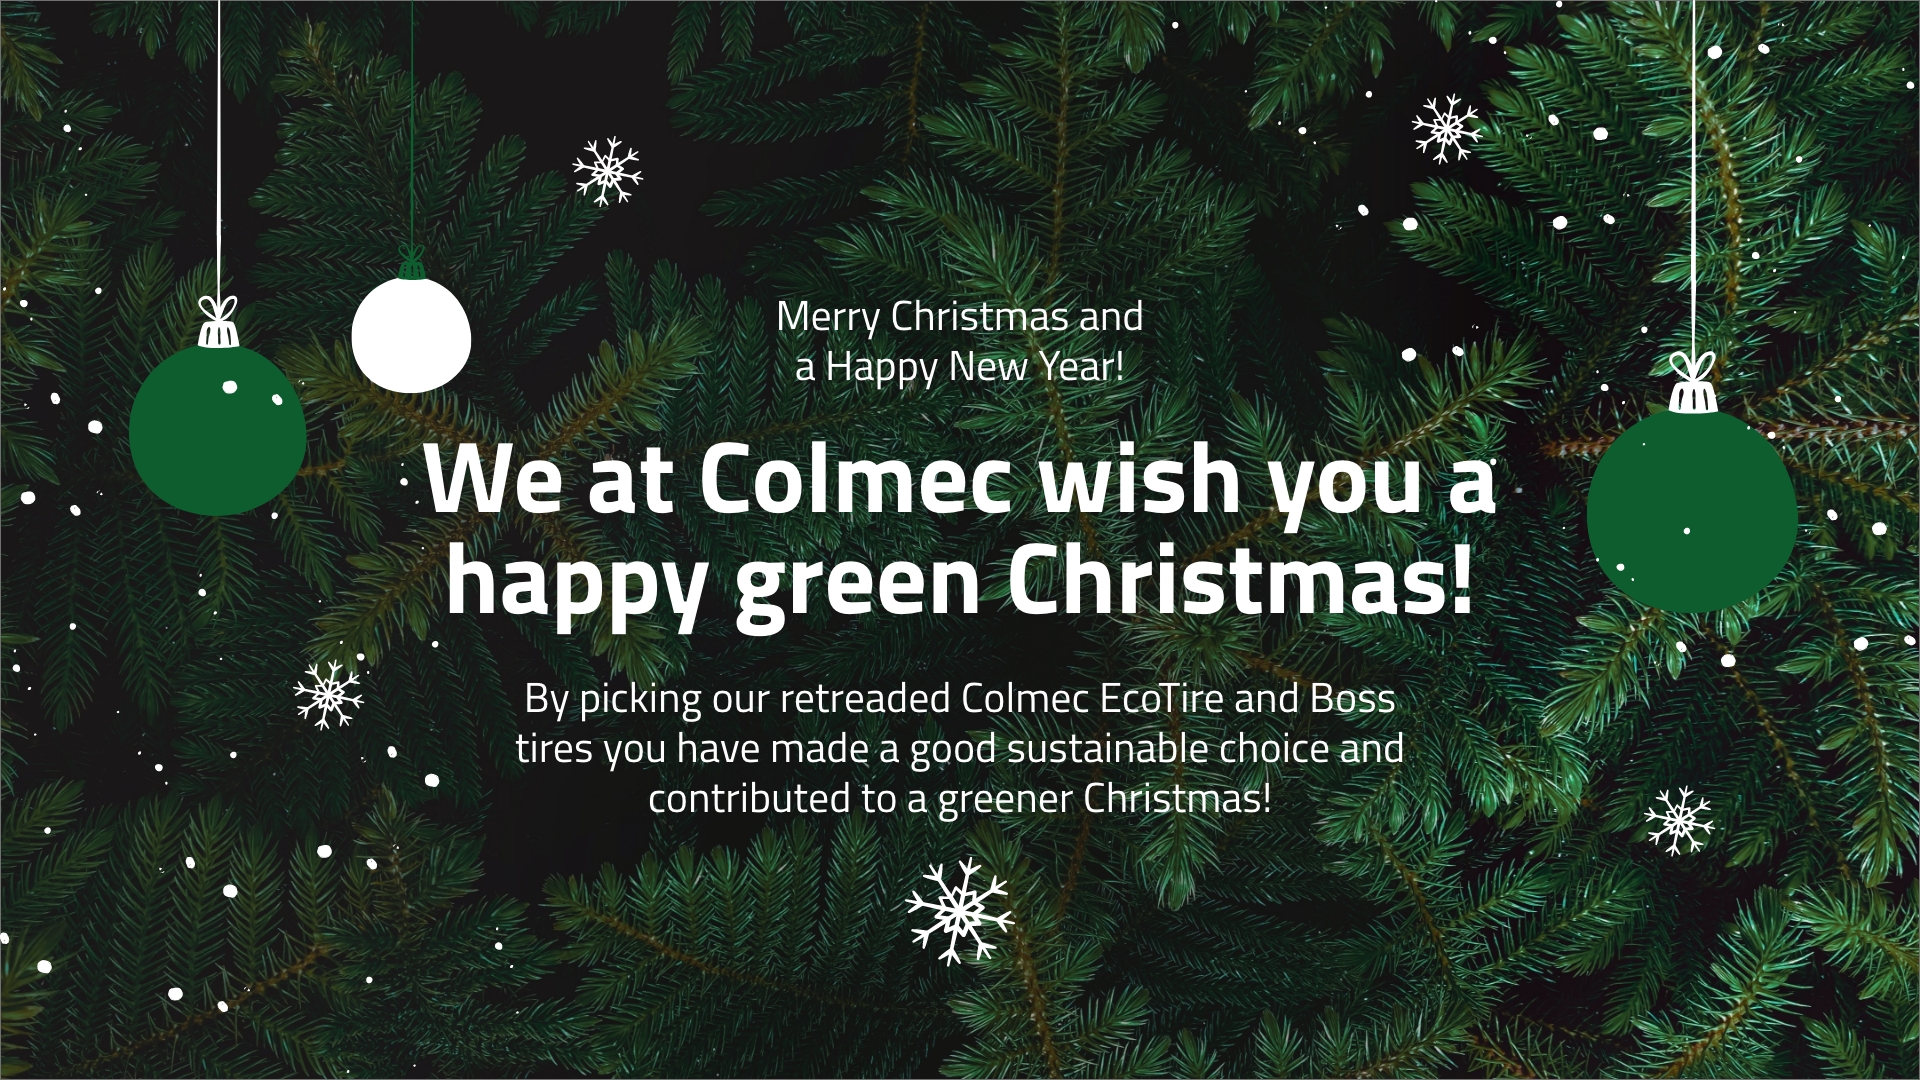 Christmas card with the text "We at Colmec wish you a happy green Christmas!"